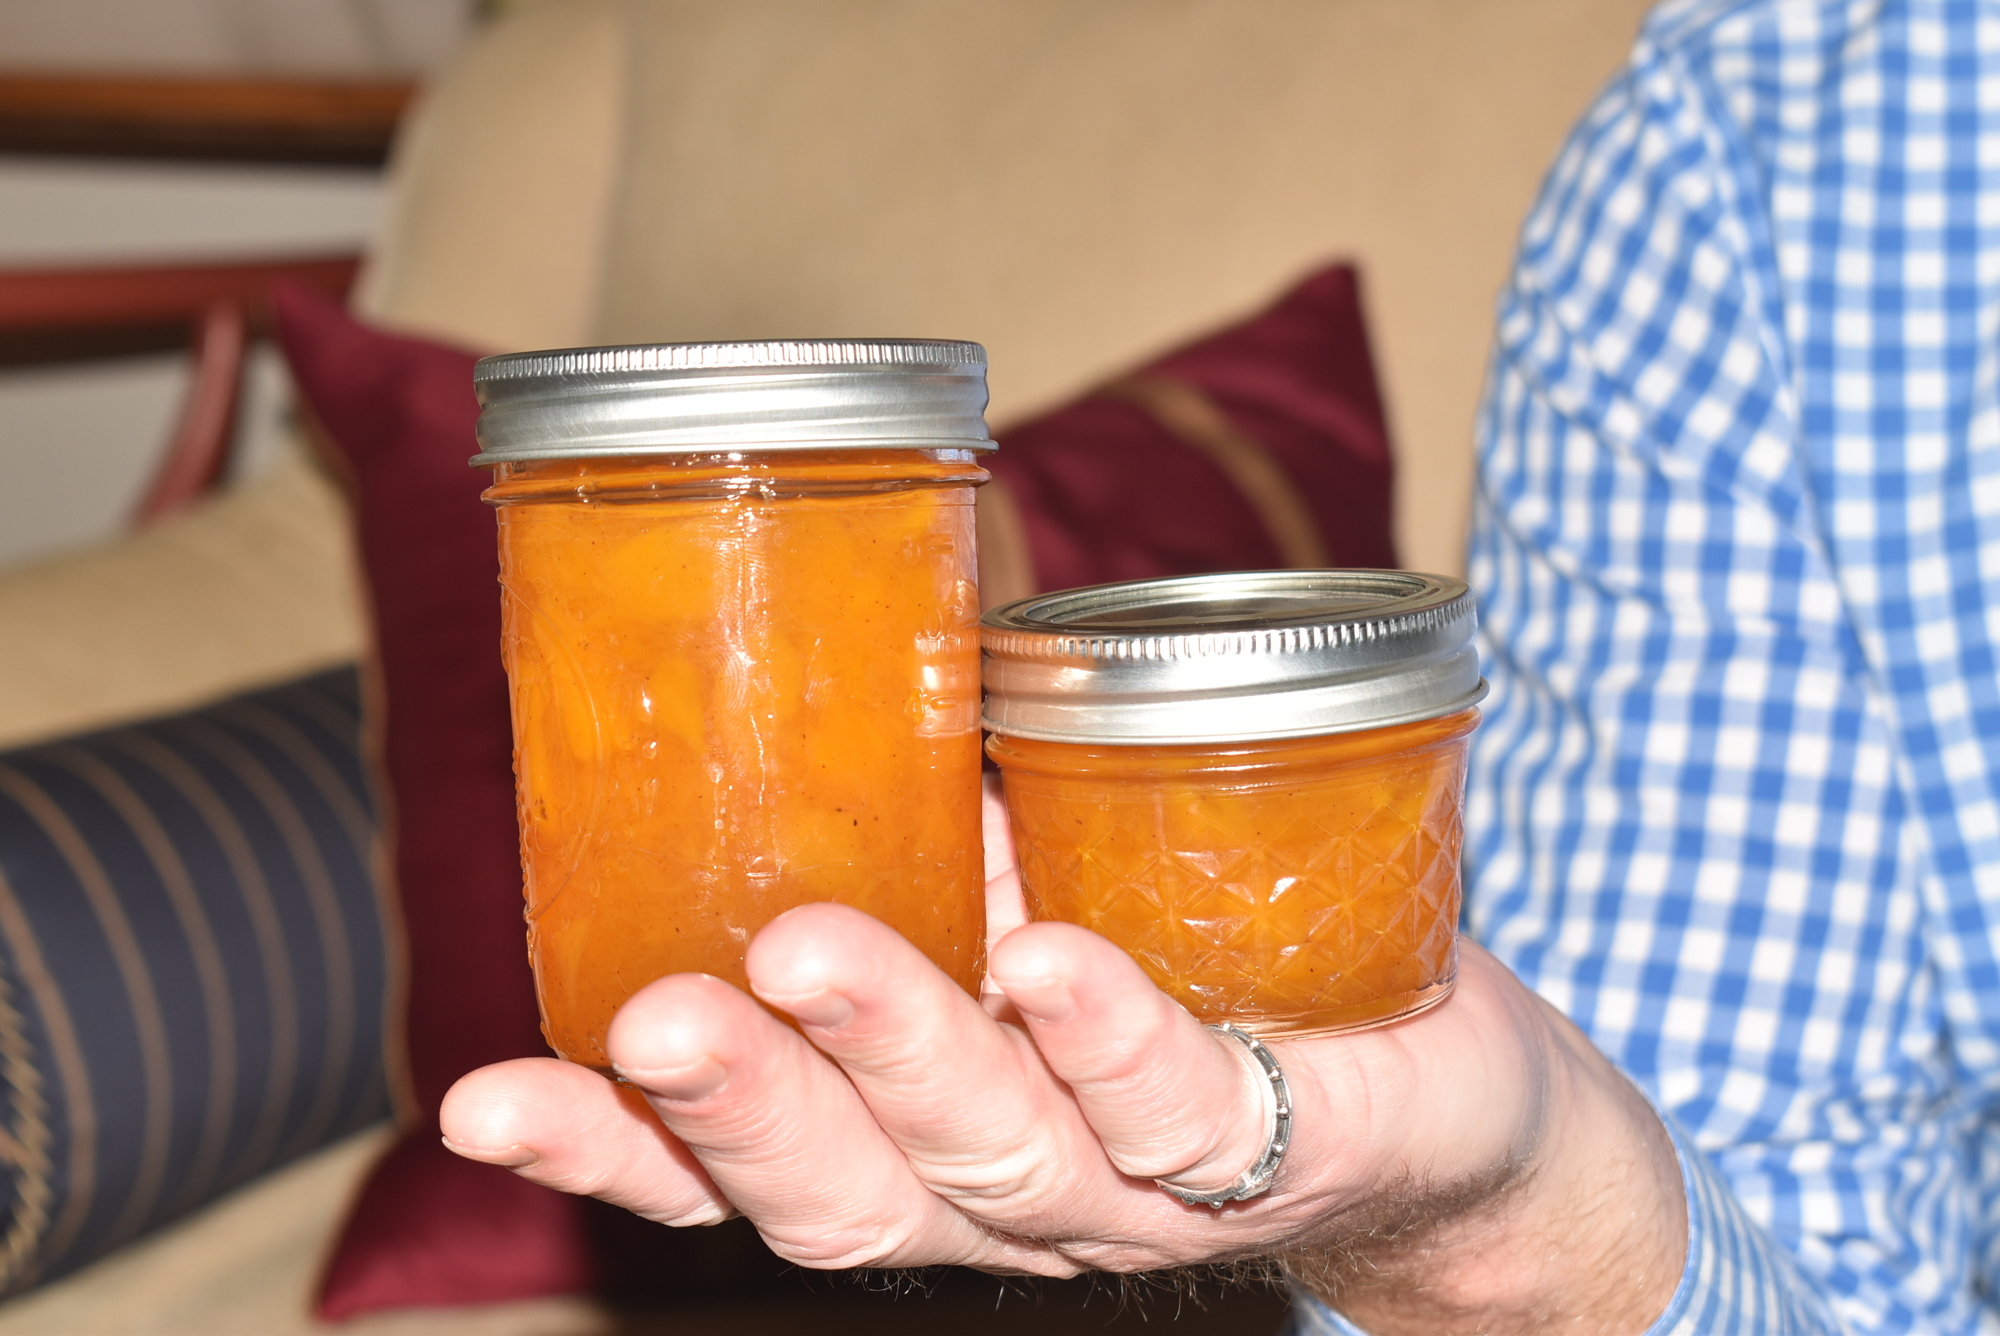 Patterson said he's happy with how his mango preserves turned out and that the fruit is a beautiful color when cooked.